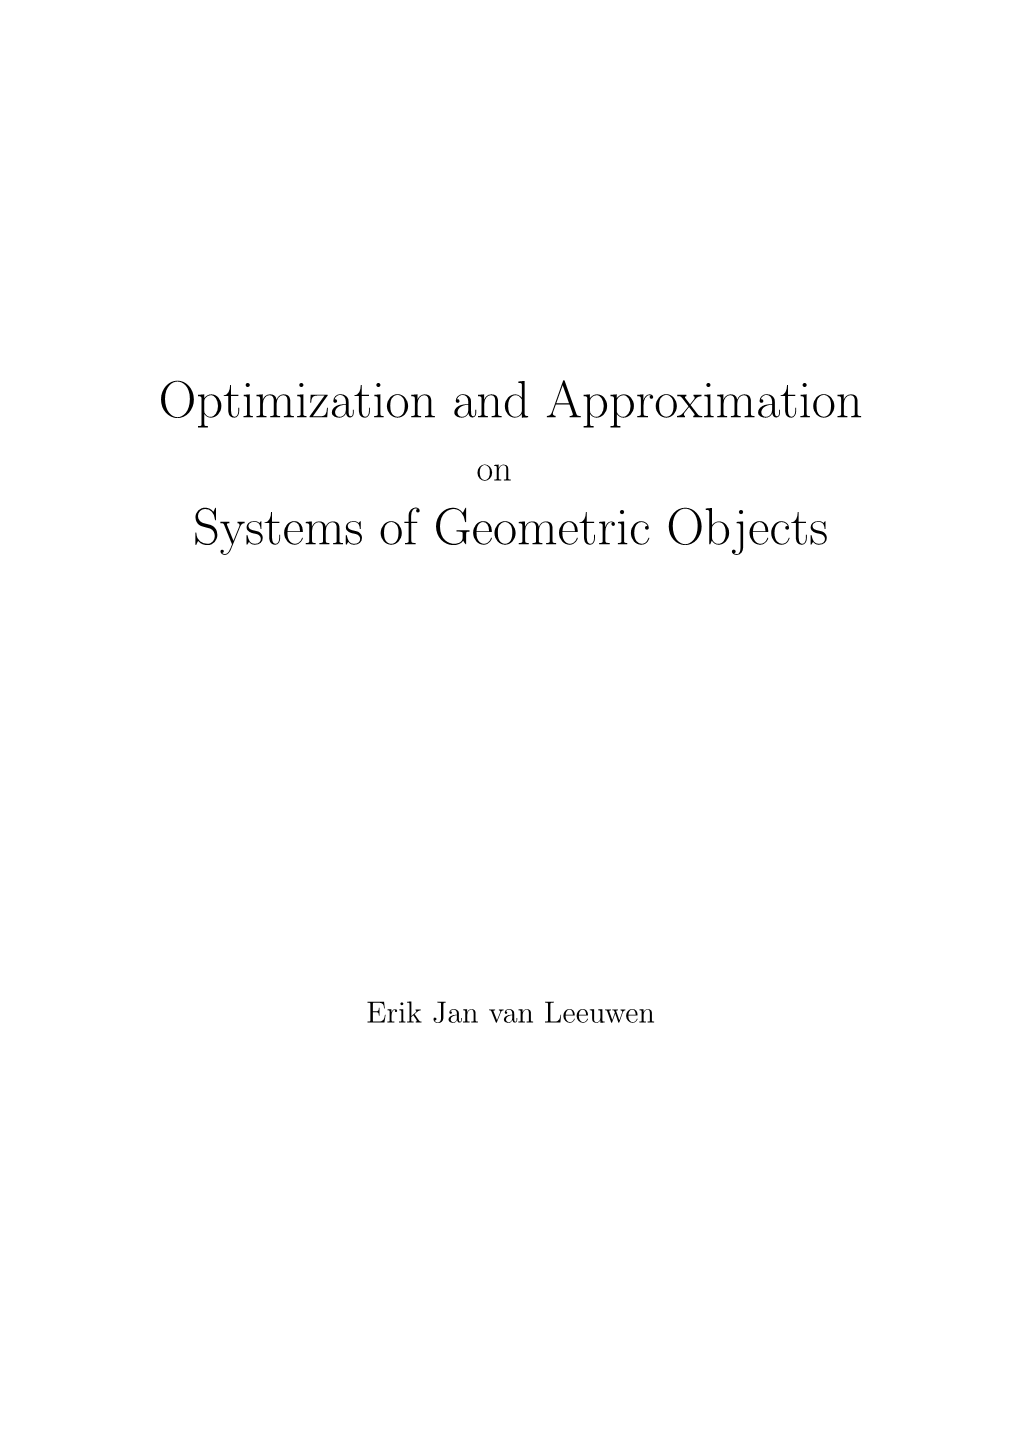 Optimization and Approximation on Systems of Geometric Objects